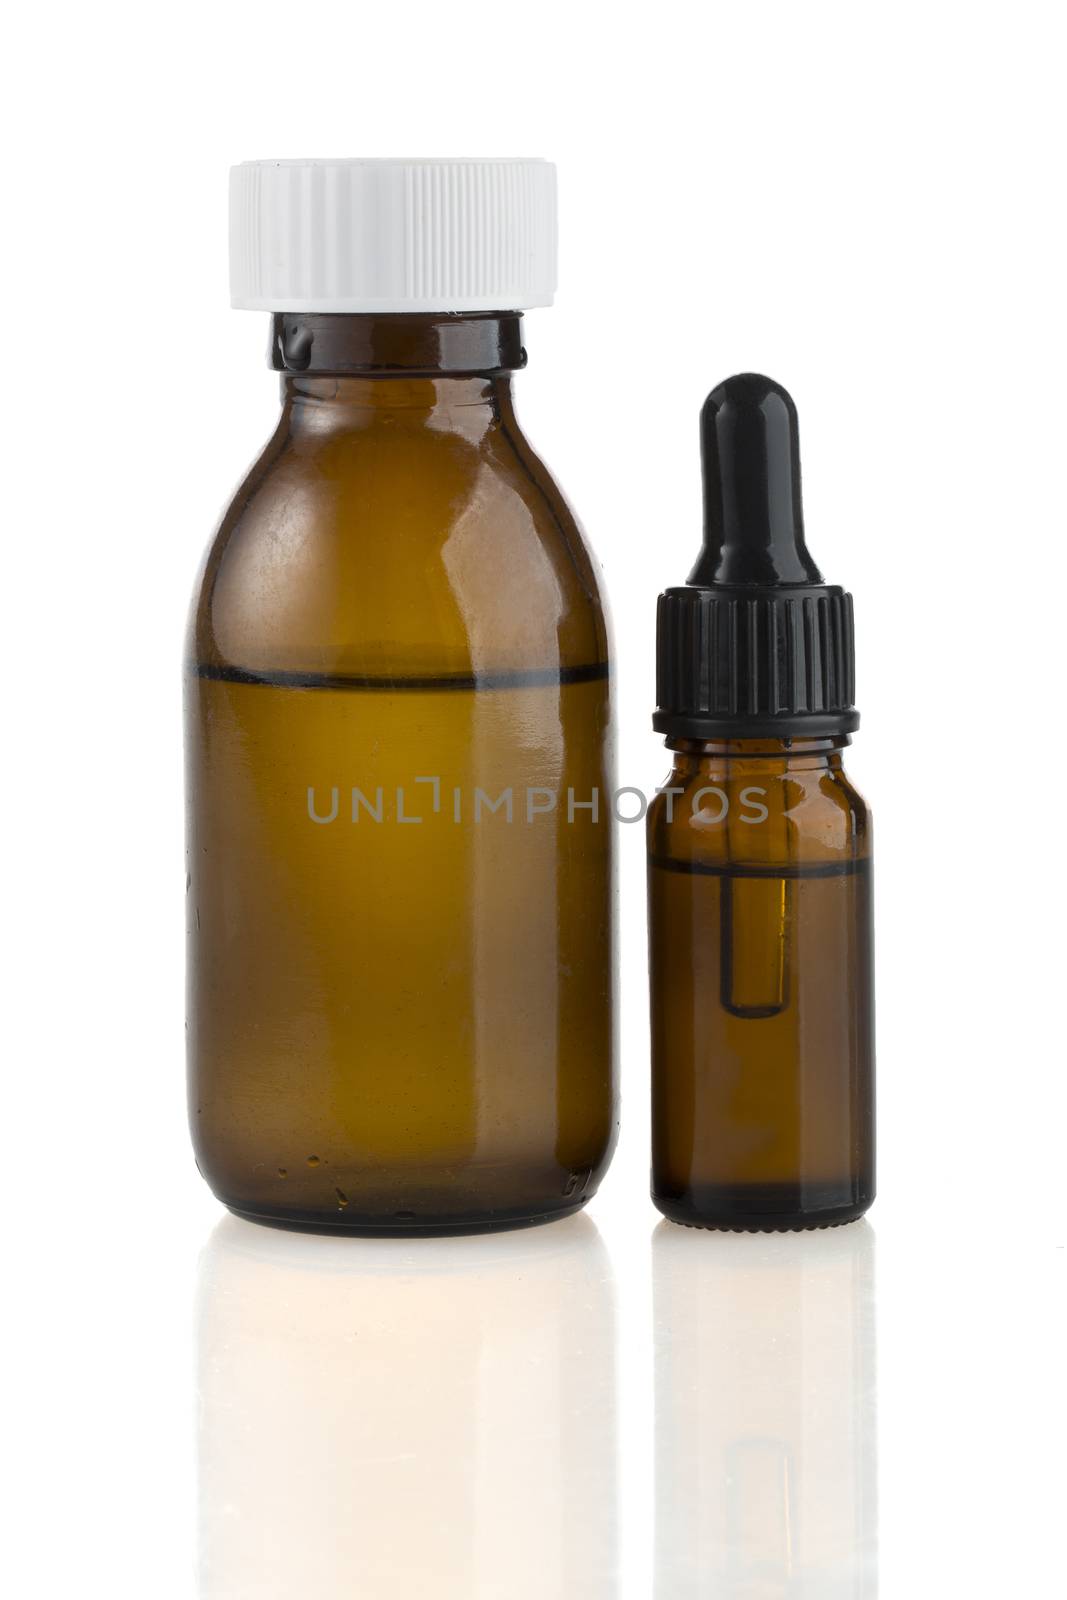 A medicine bottle and medicine dropper isolated on white.